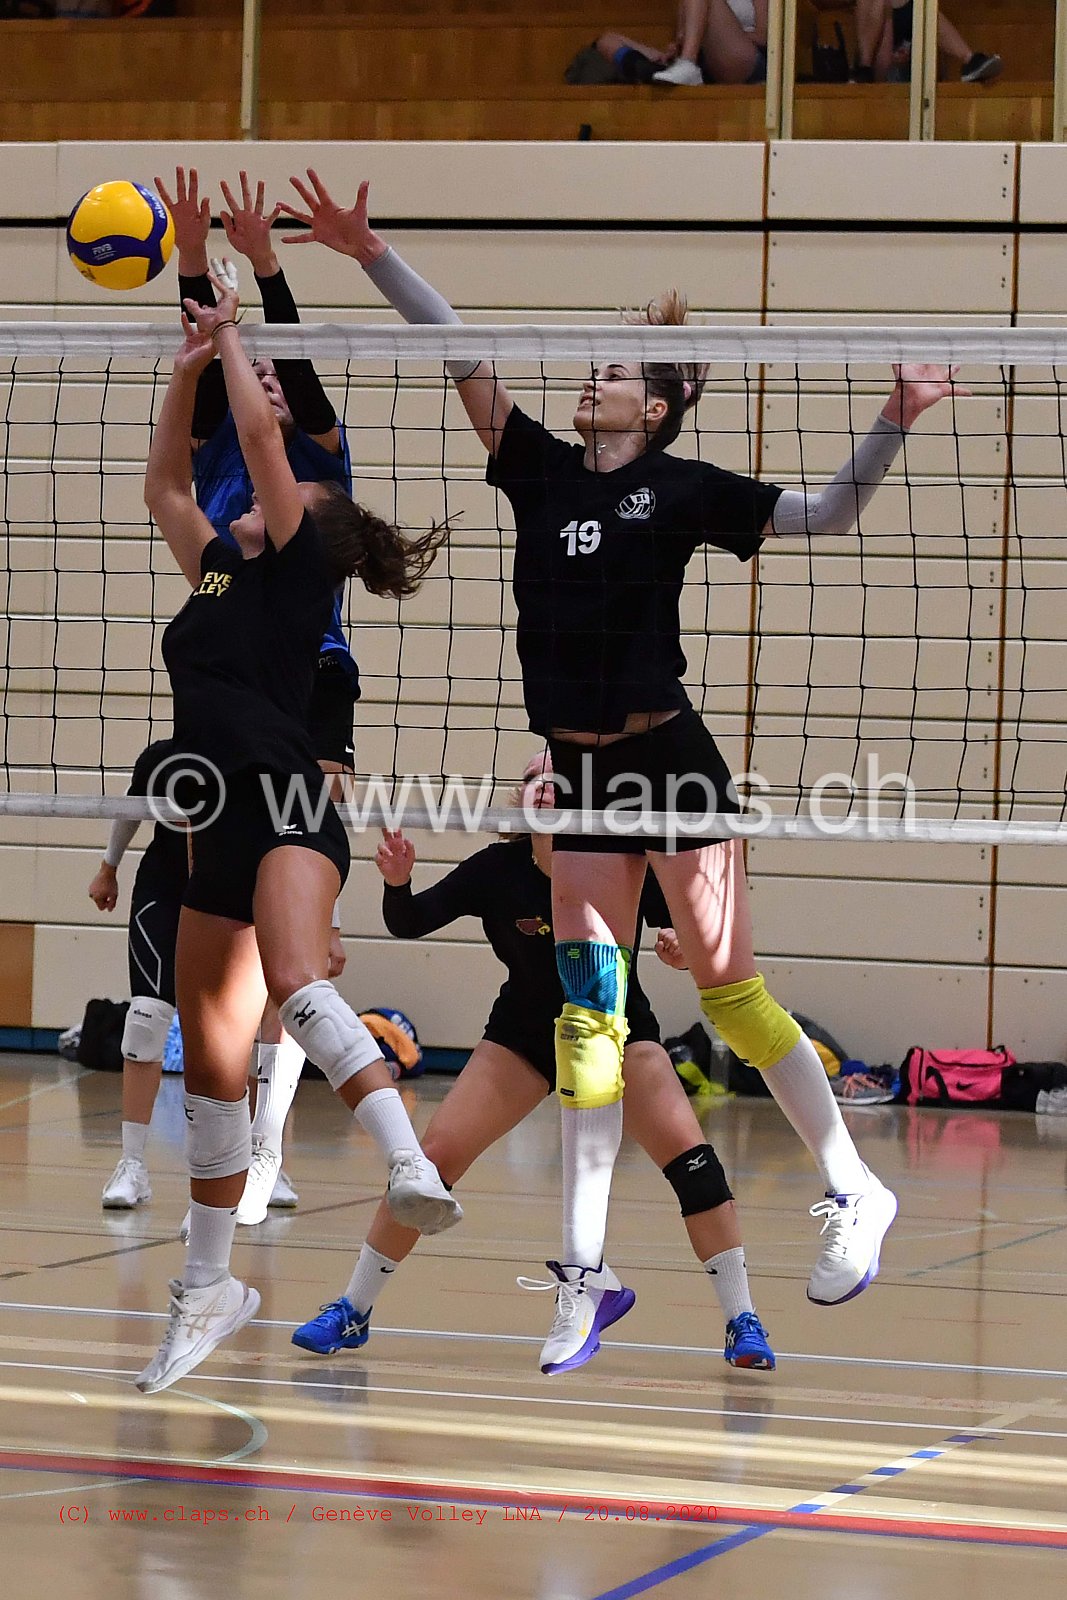 GeneveVolley - Entrainement